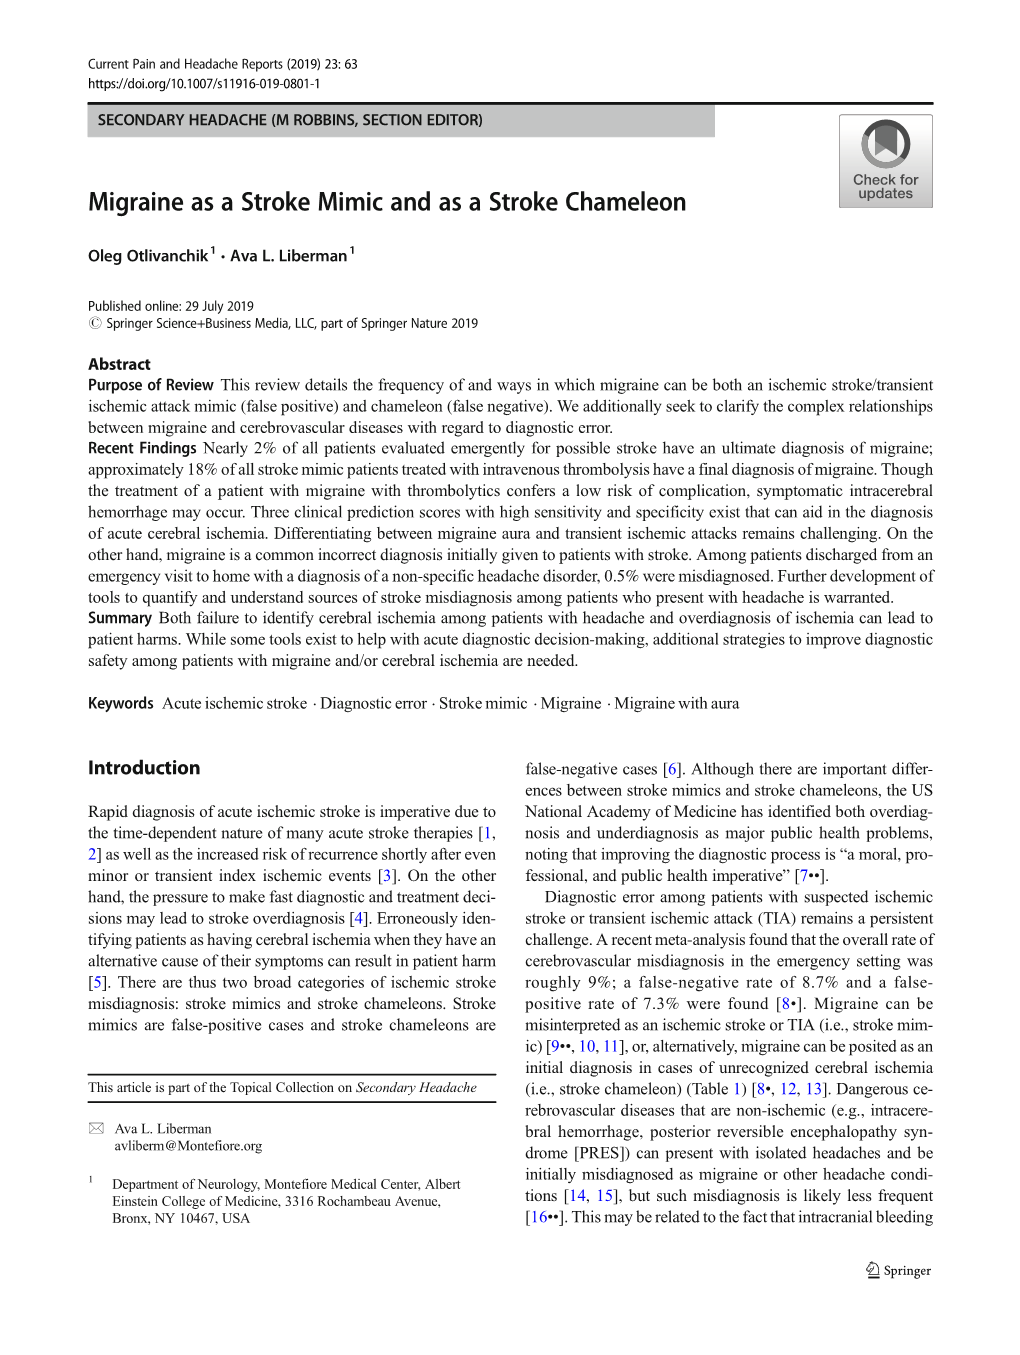 Migraine As a Stroke Mimic and As a Stroke Chameleon